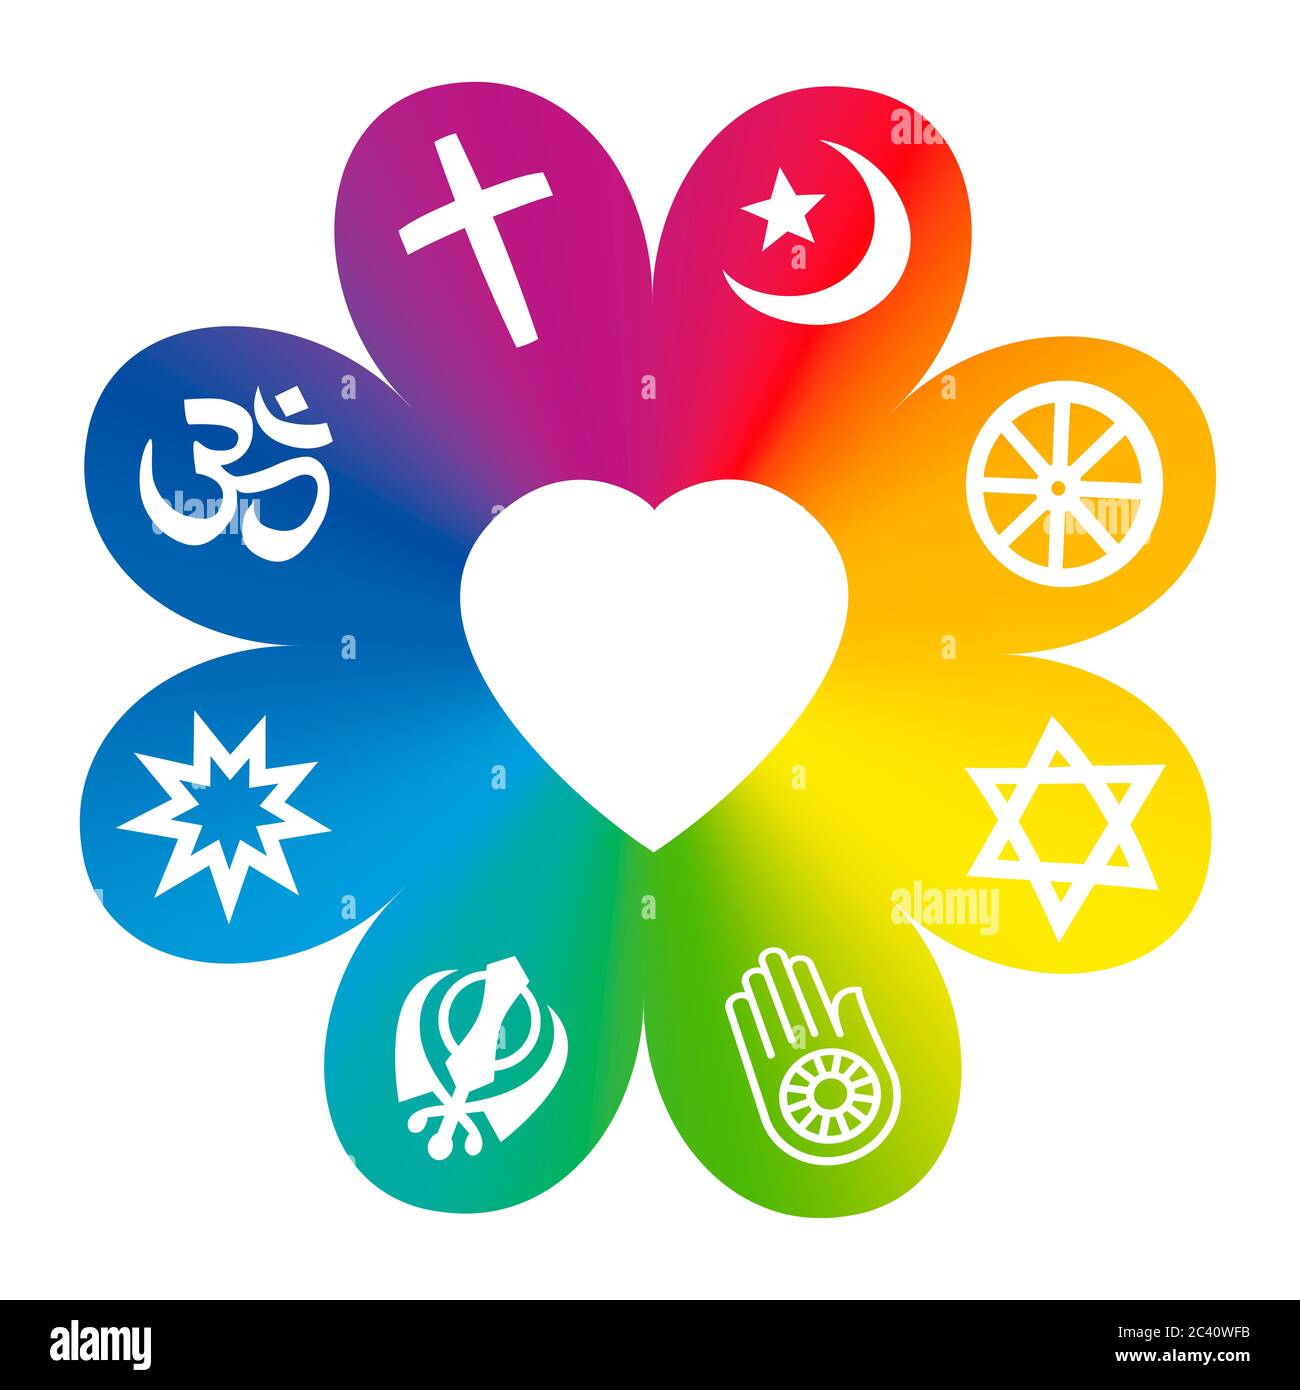 World religions. Symbols on a rainbow colored flower with a heart in center as a symbol for religious unity or commonness. Stock Photo